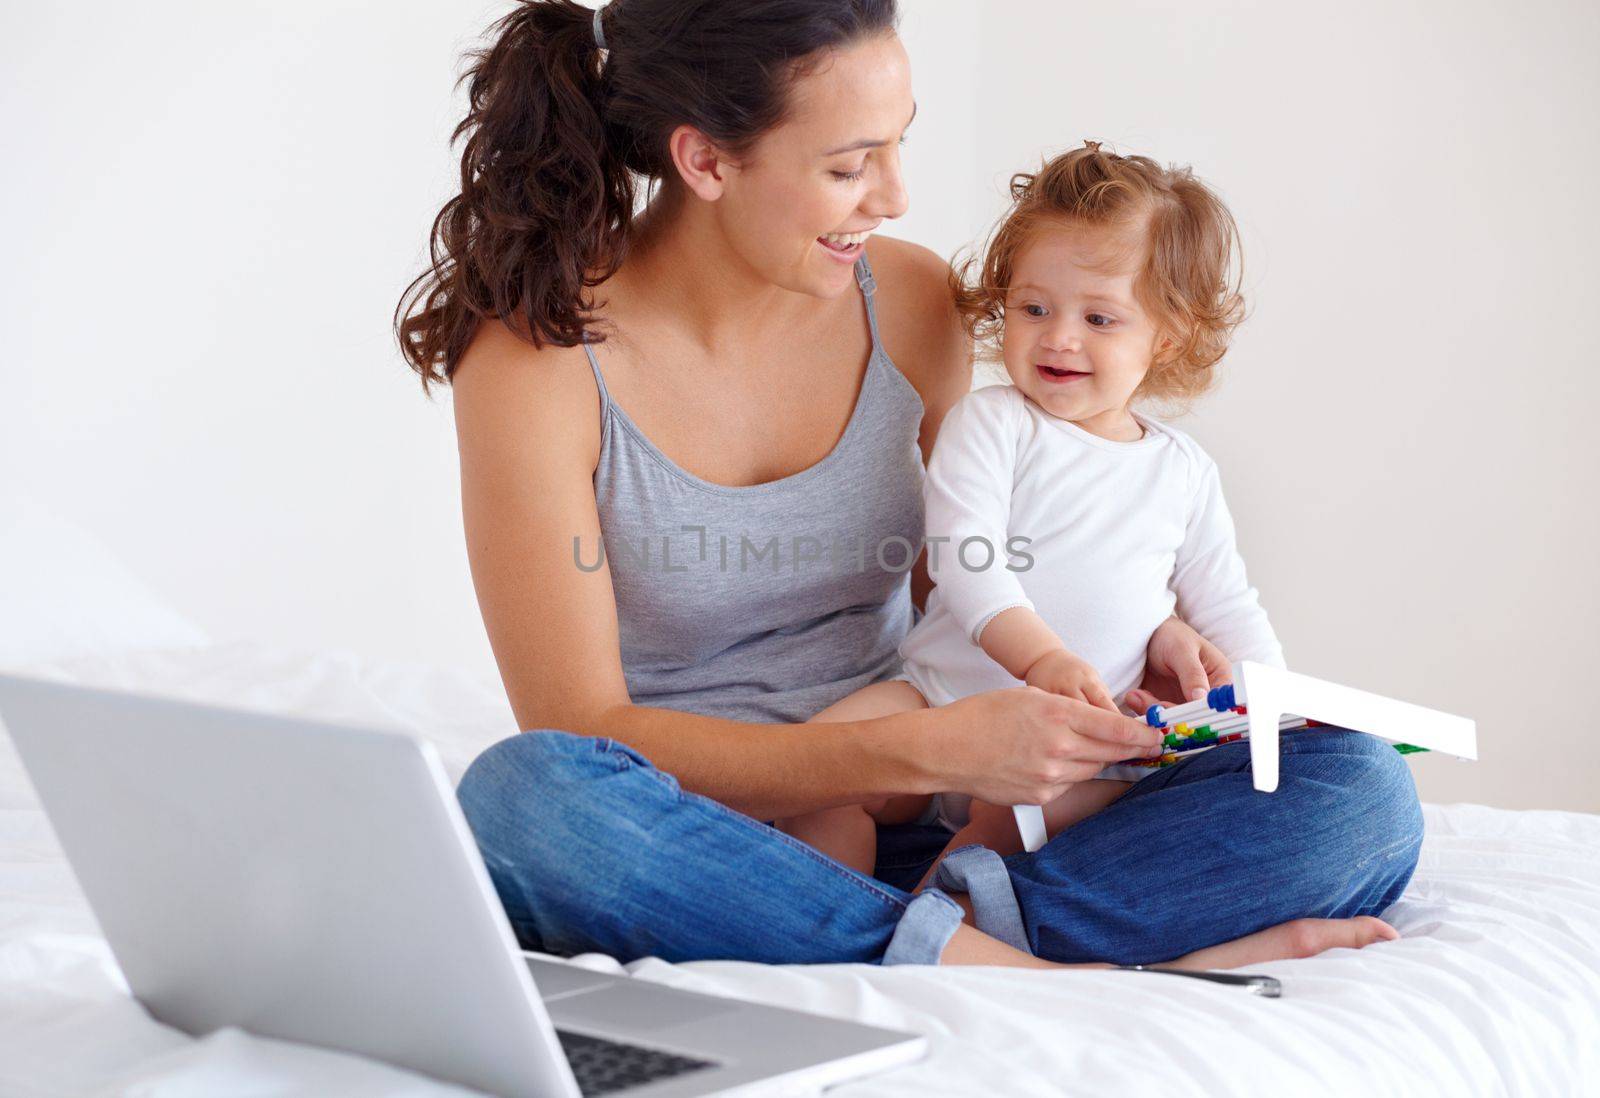 Juggling motherhood with work. A young mother sitting on a bed with her baby daughter on her lap and her laptop by her side